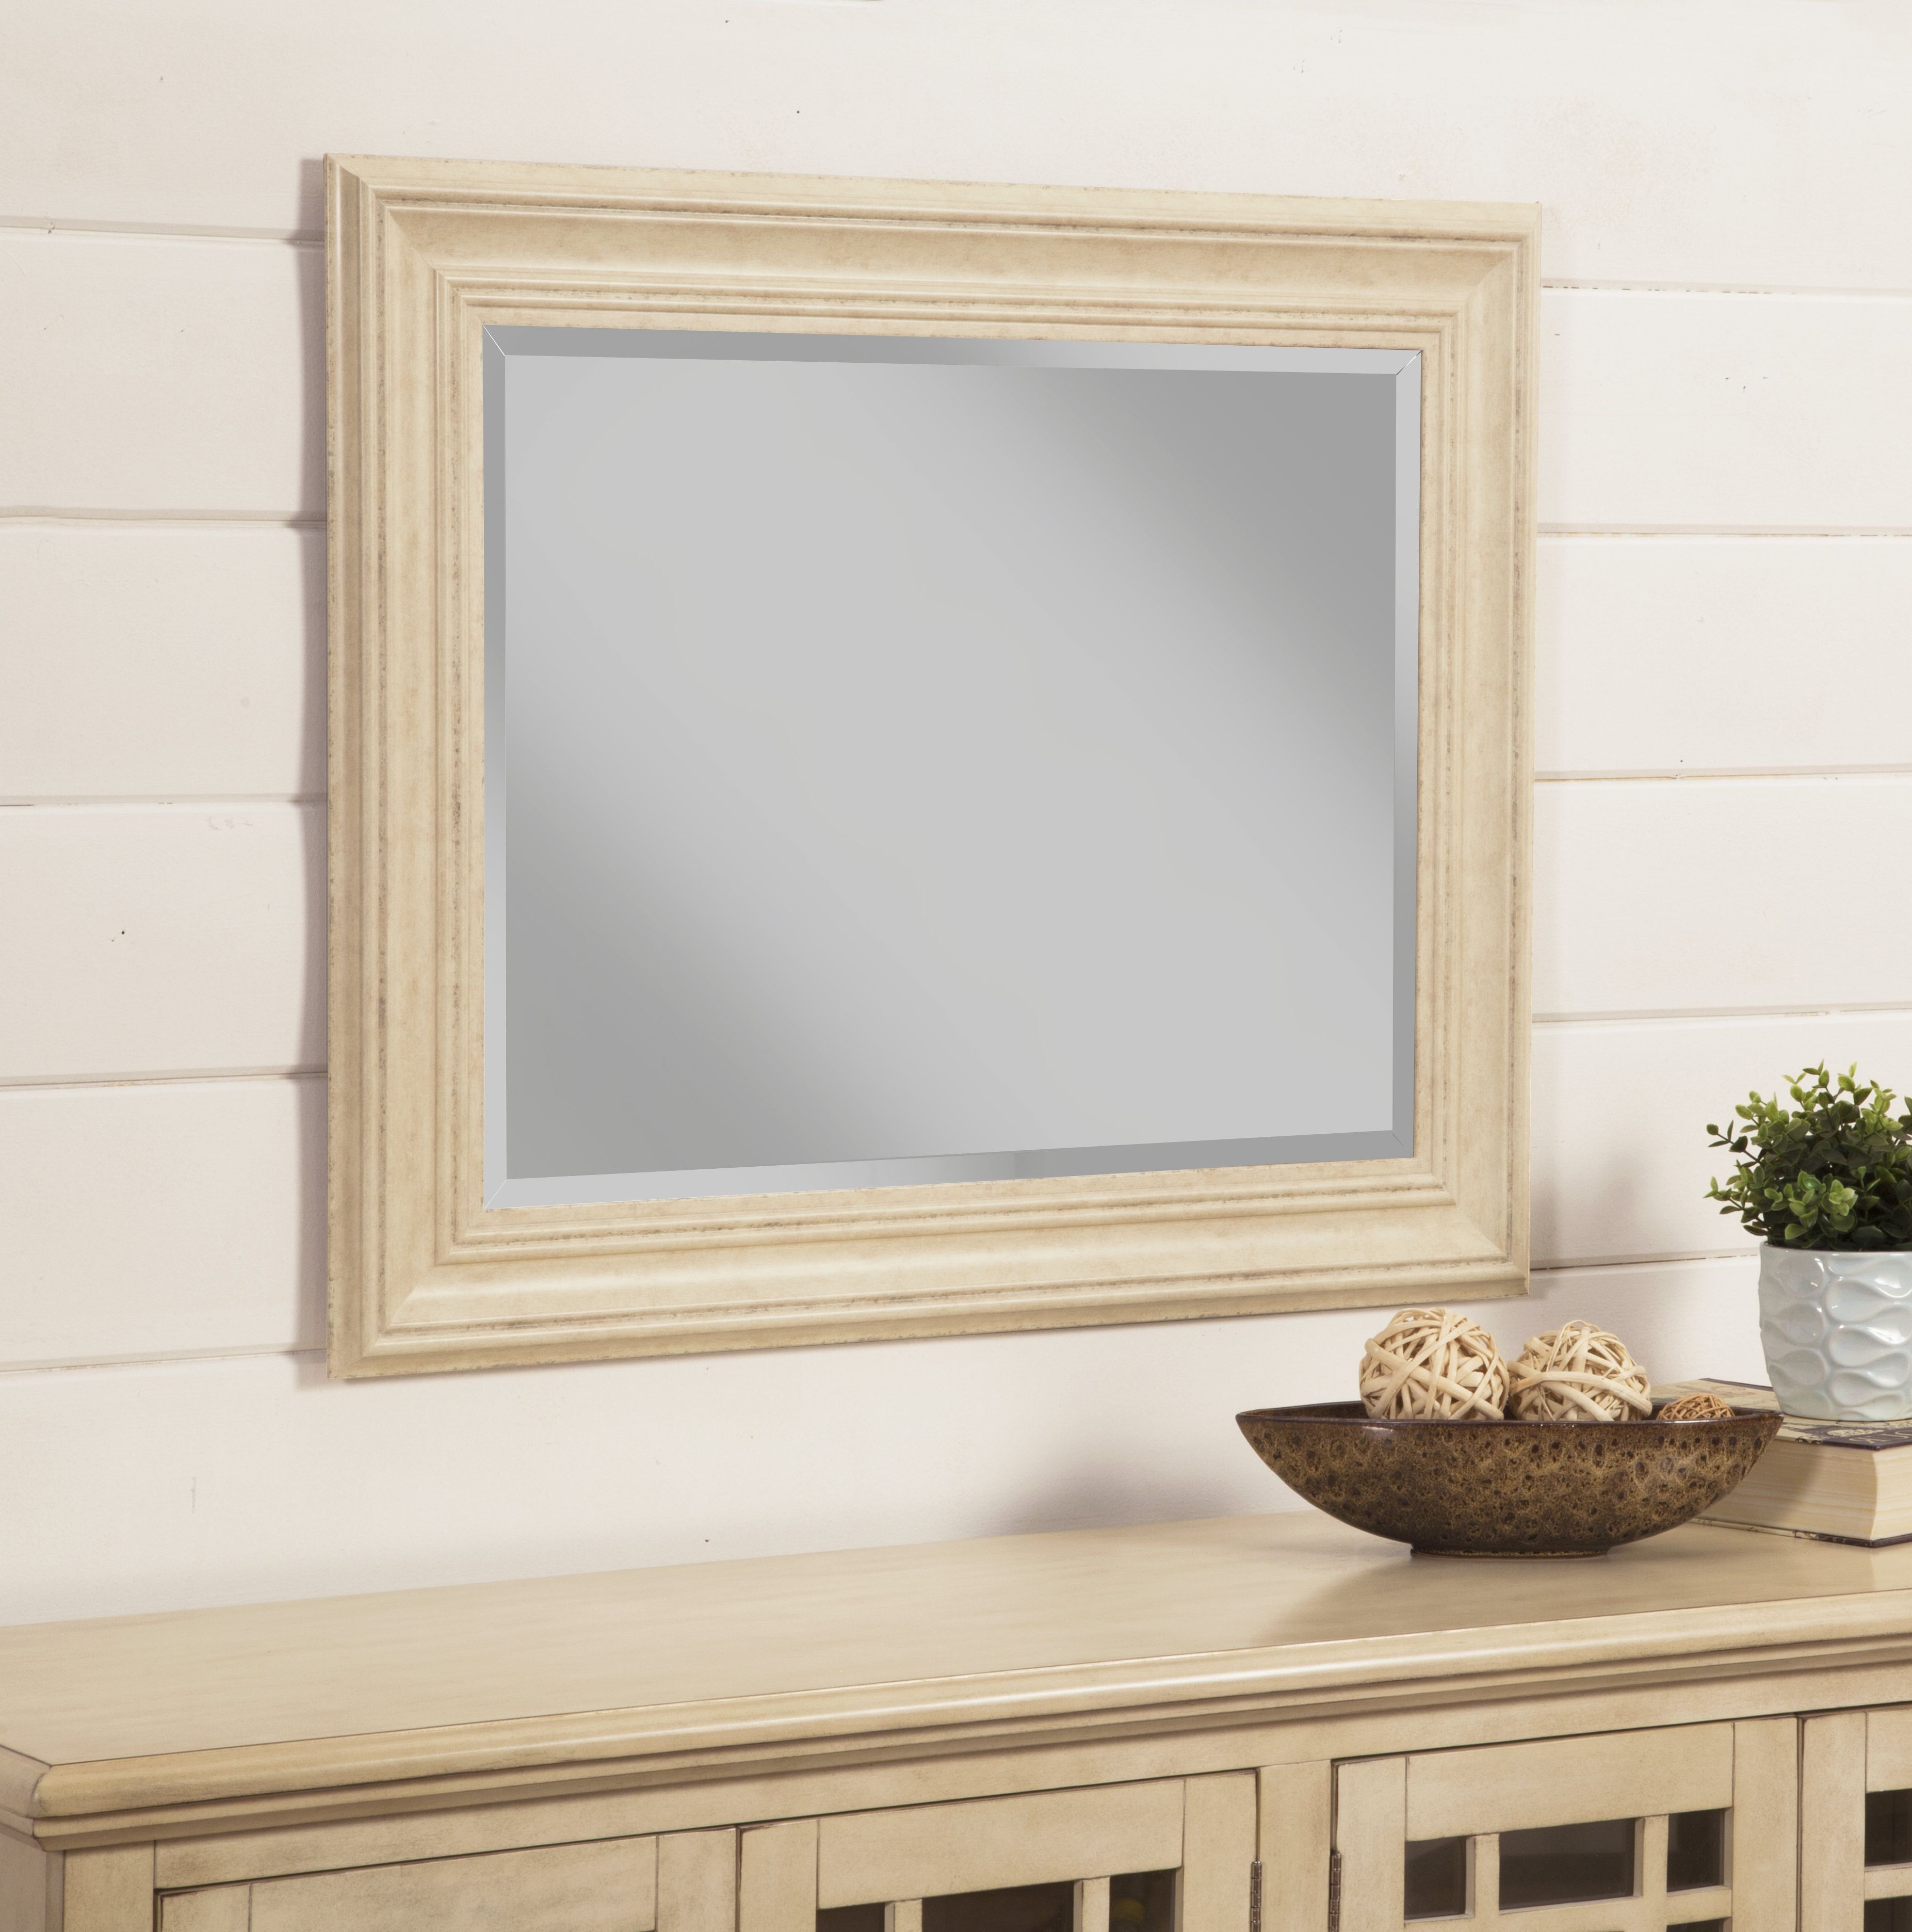 Newest Traditional Beveled Wall Mirrors Regarding Attie Traditional Beveled Wall Mirror (View 9 of 20)